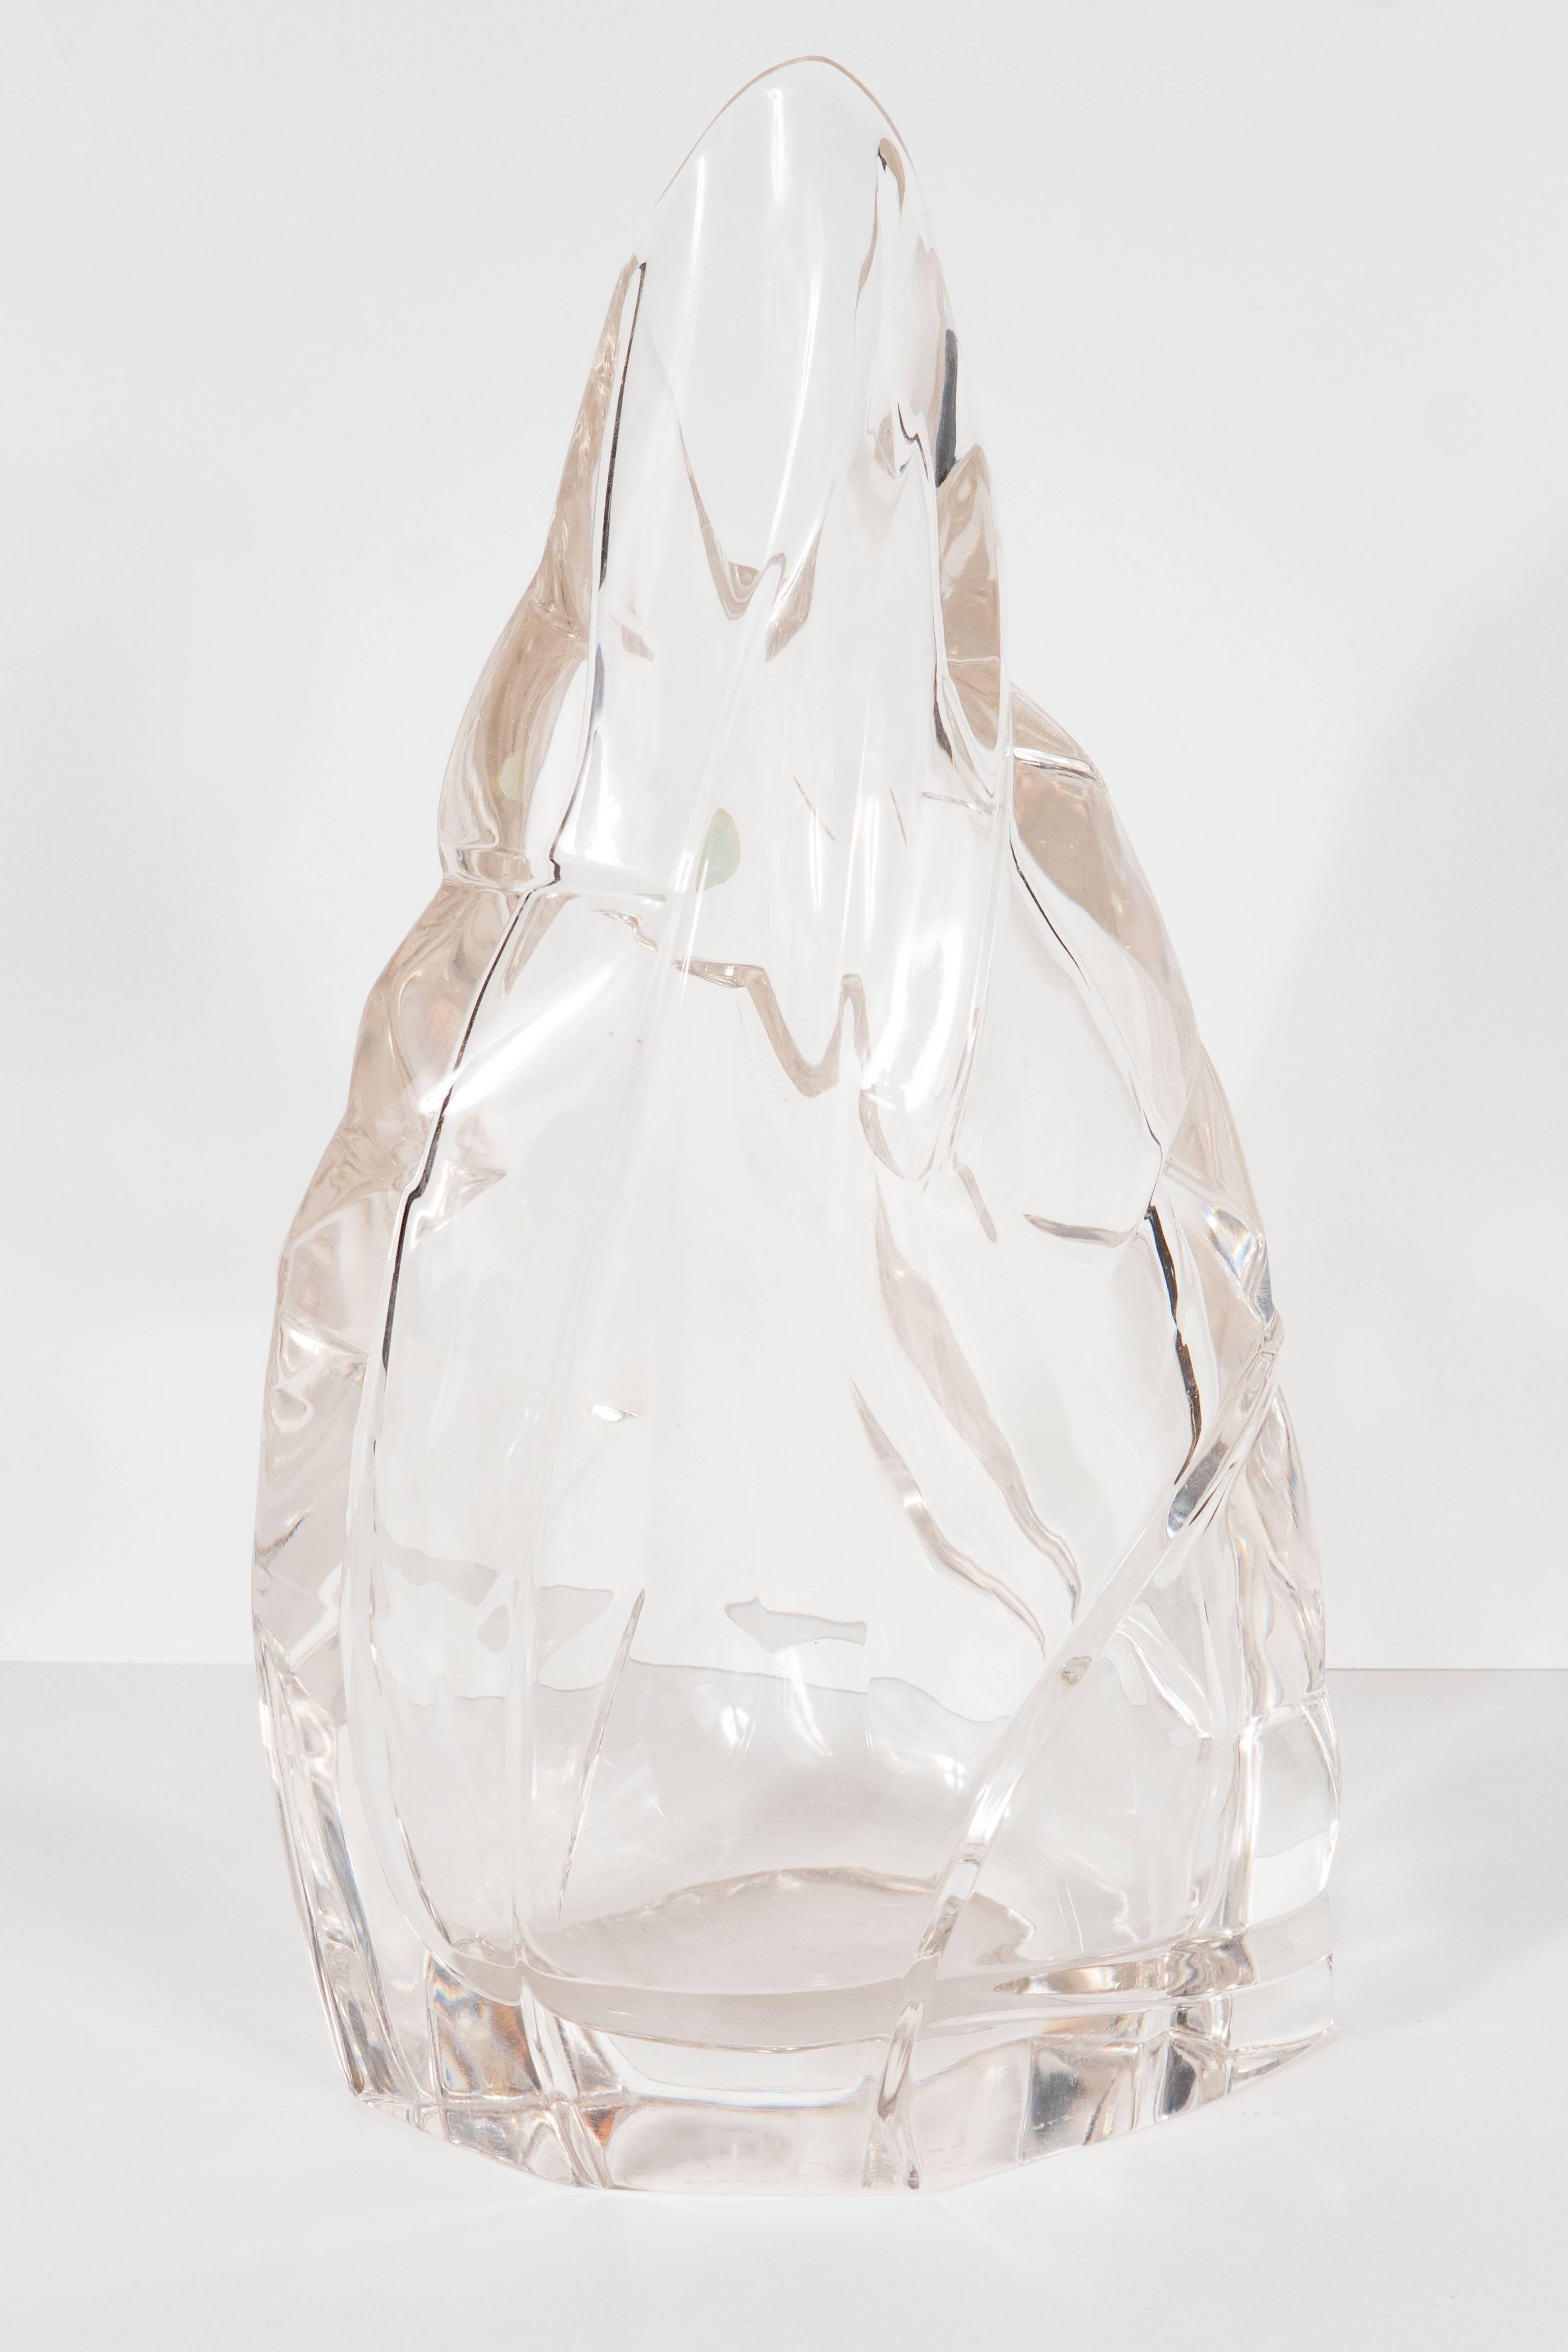 frank gehry vase